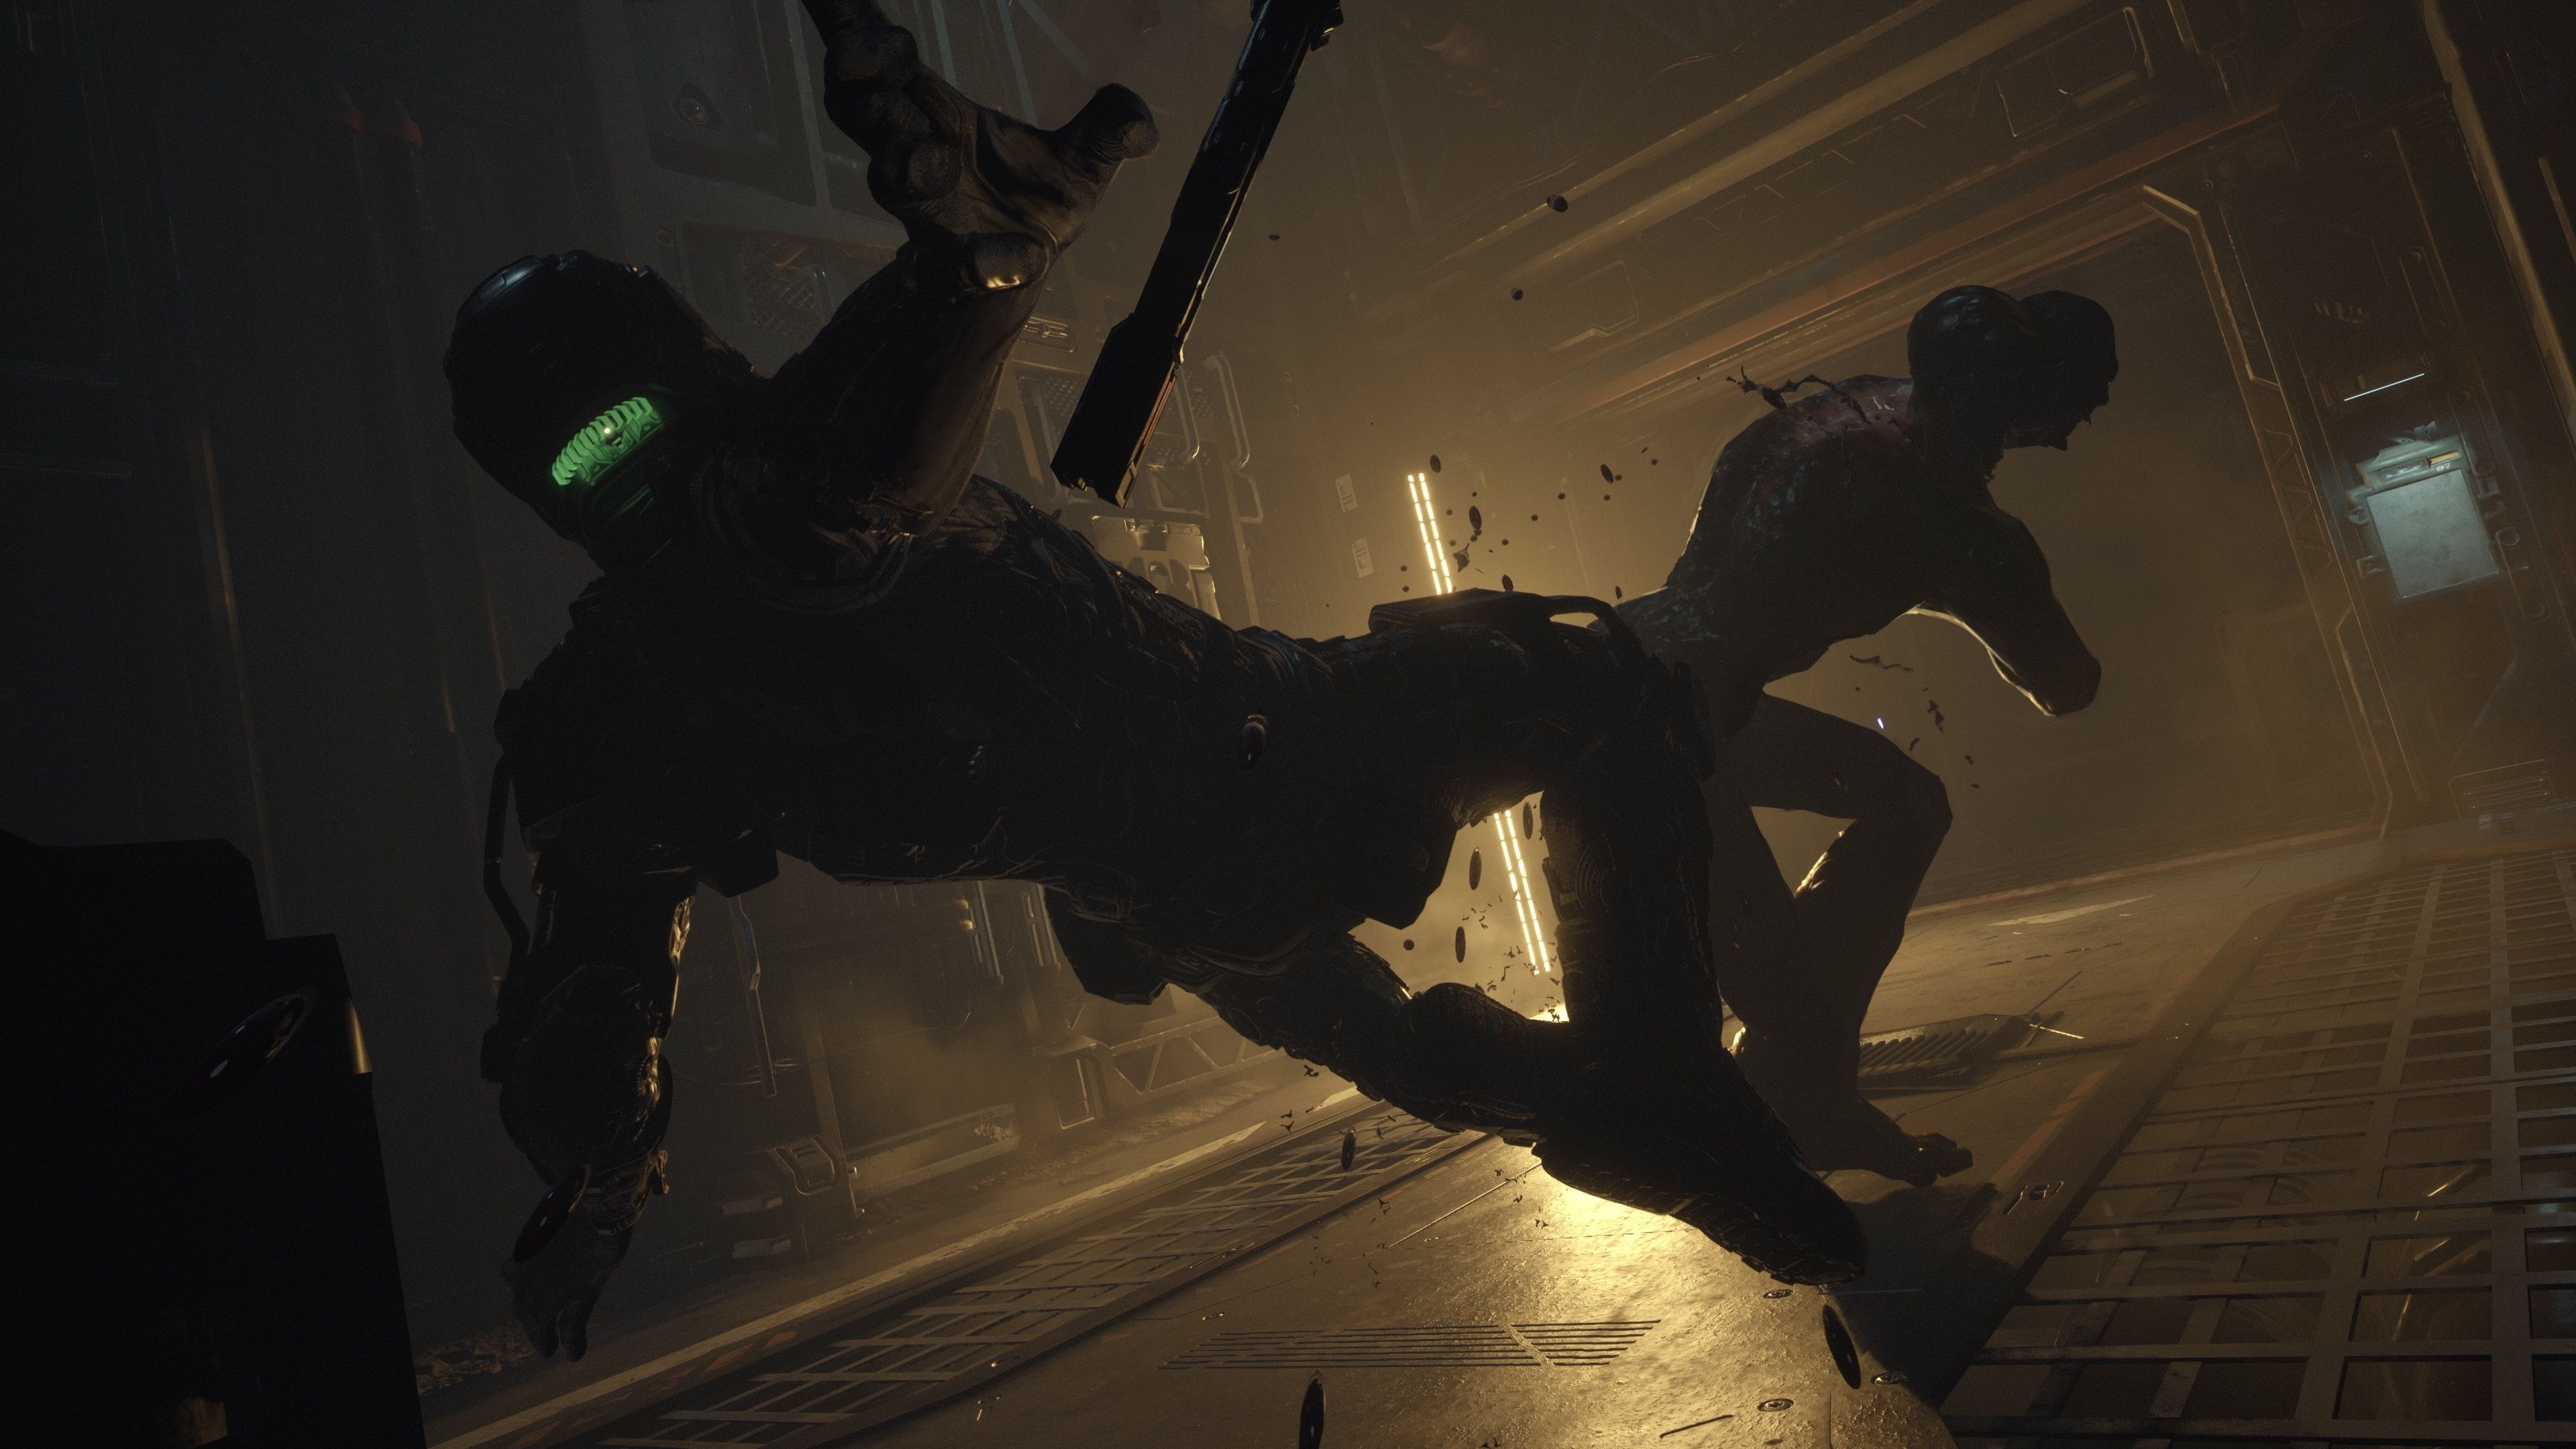 The Callisto Protocol' Review: A Soulless 'Dead Space' Clone